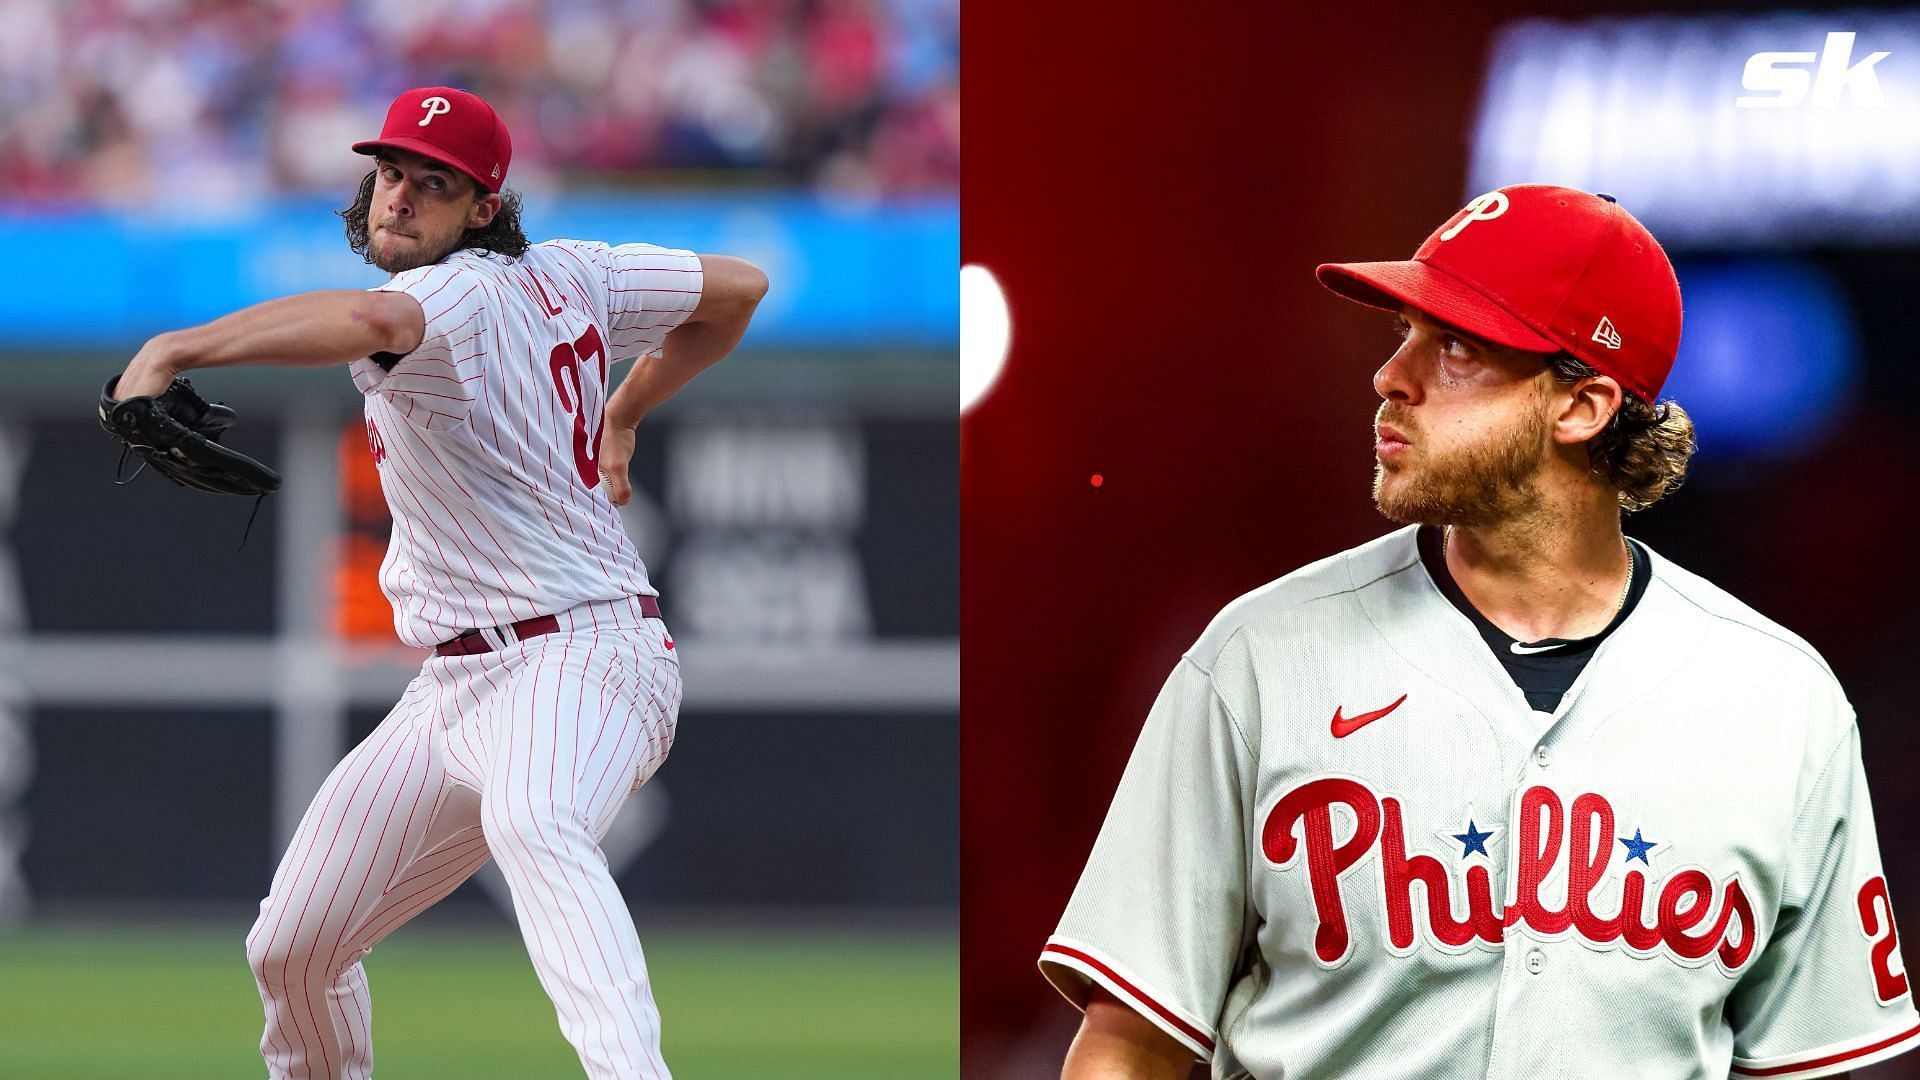 Aaron Nola inked the biggest extension of his career with the Phillies